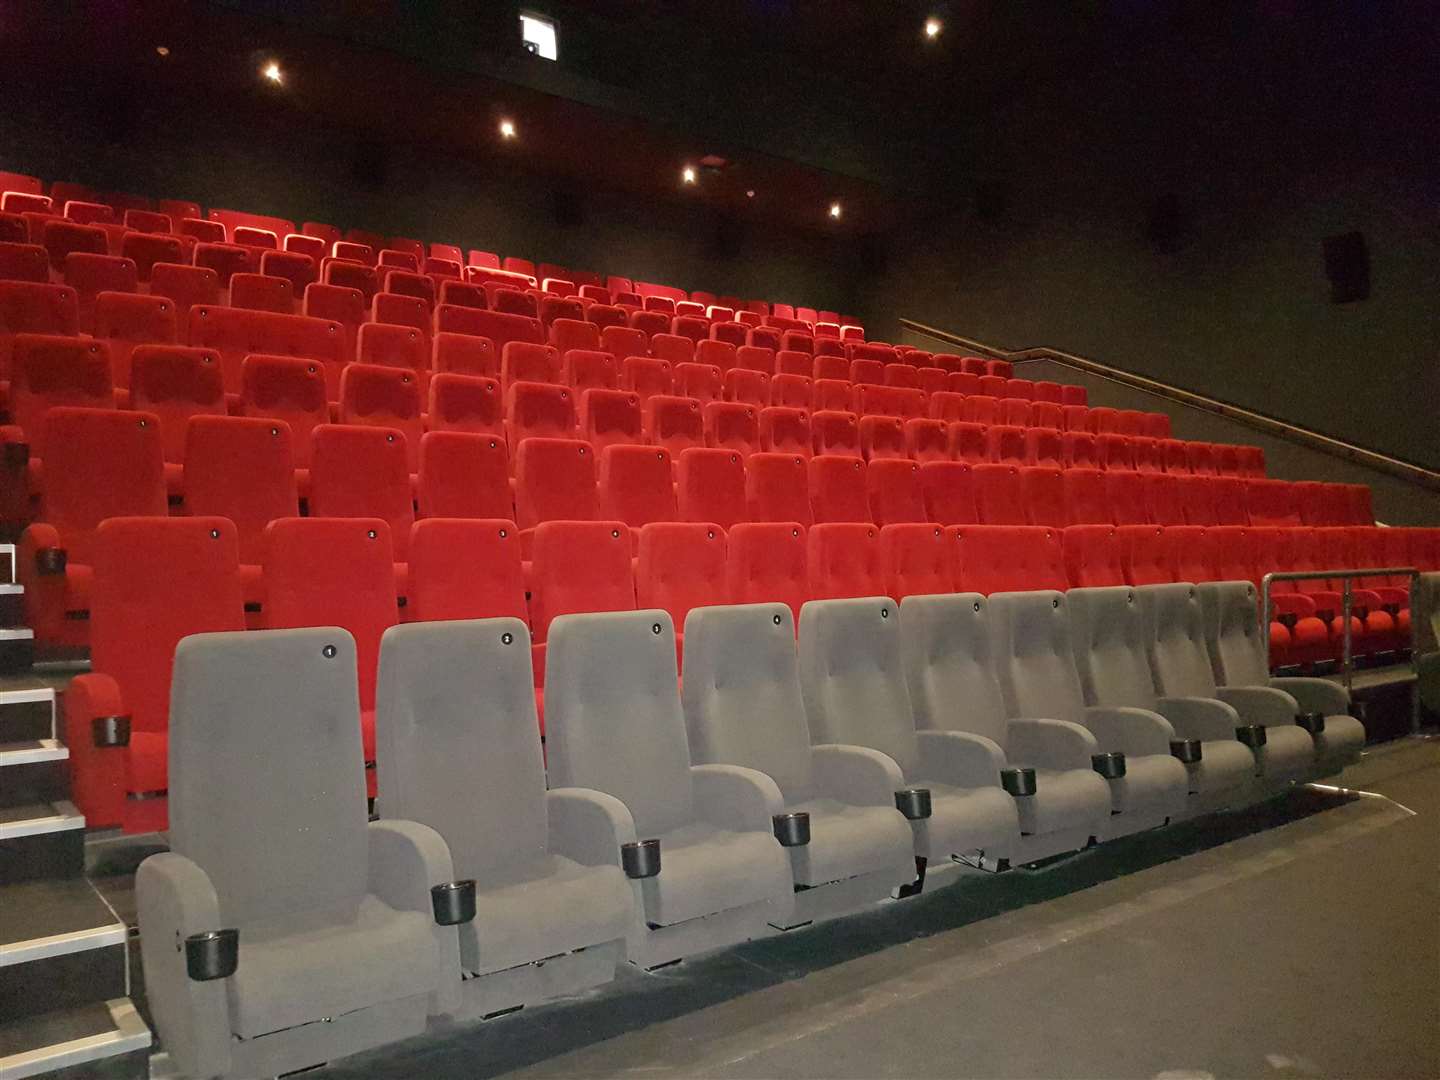 Inside one of the film auditoriums